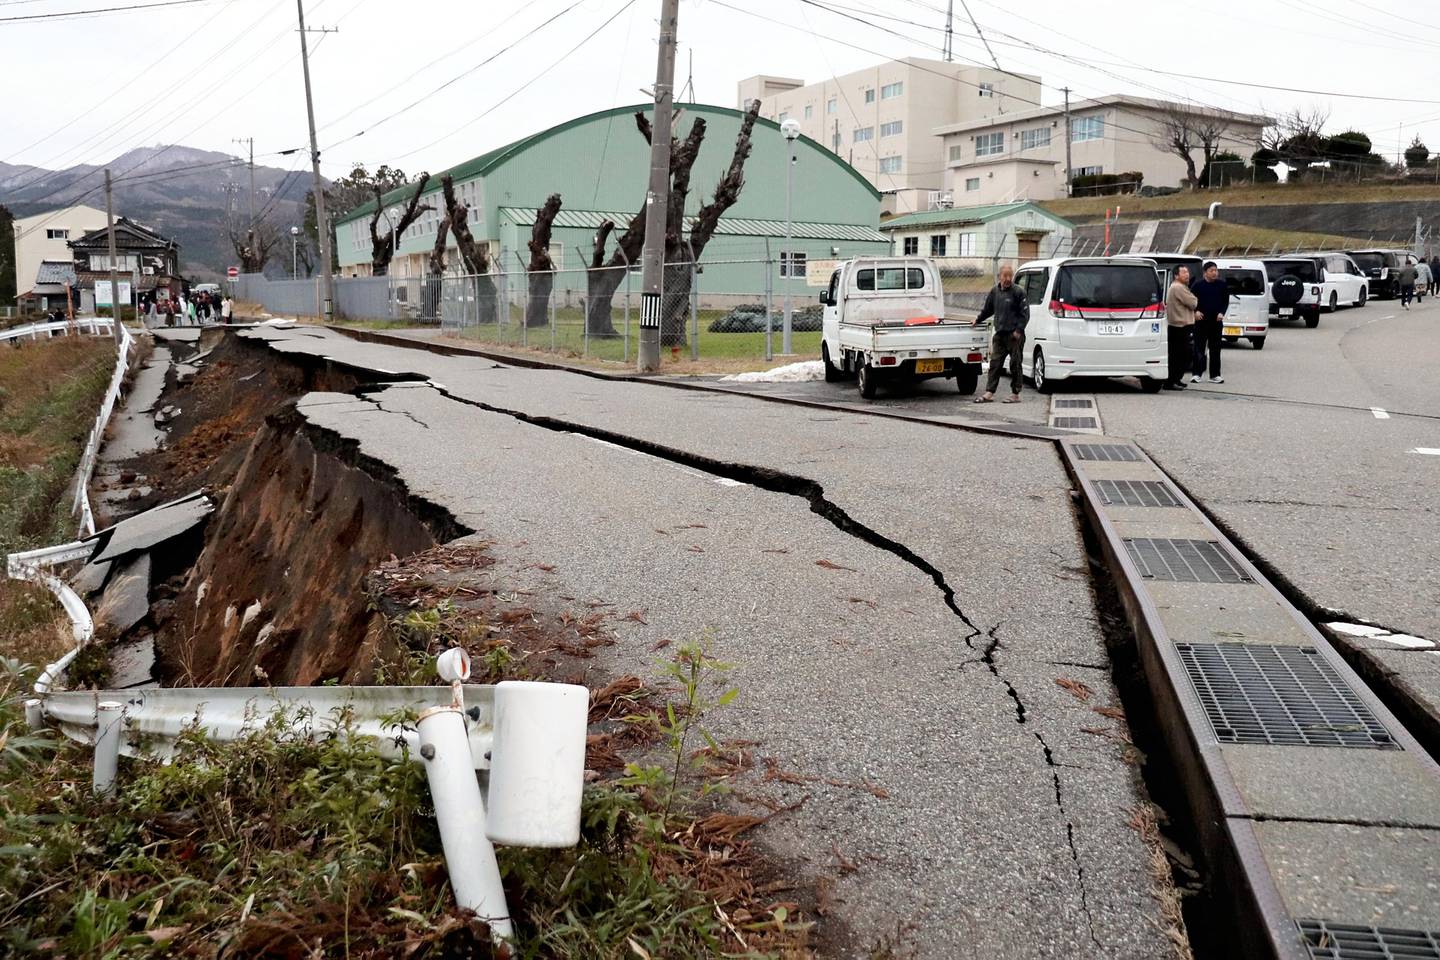 People stand next to large cracks in the pavement after evacuating into a street in the city of Wajima, Ishikawa prefecture on January 1, 2024, after a major 7.5 magnitude earthquake struck the Noto region in Ishikawa prefecture in the afternoon. Tsunami waves over a metre high hit central Japan on January 1 after a series of powerful earthquakes that damaged homes, closed highways and prompted authorities to urge people to run to higher ground. (Photo by Yusuke FUKUHARA / Yomiuri Shimbun / AFP) / Japan OUT / NO ARCHIVES - MANDATORY CREDIT: Yomiuri Shimbun